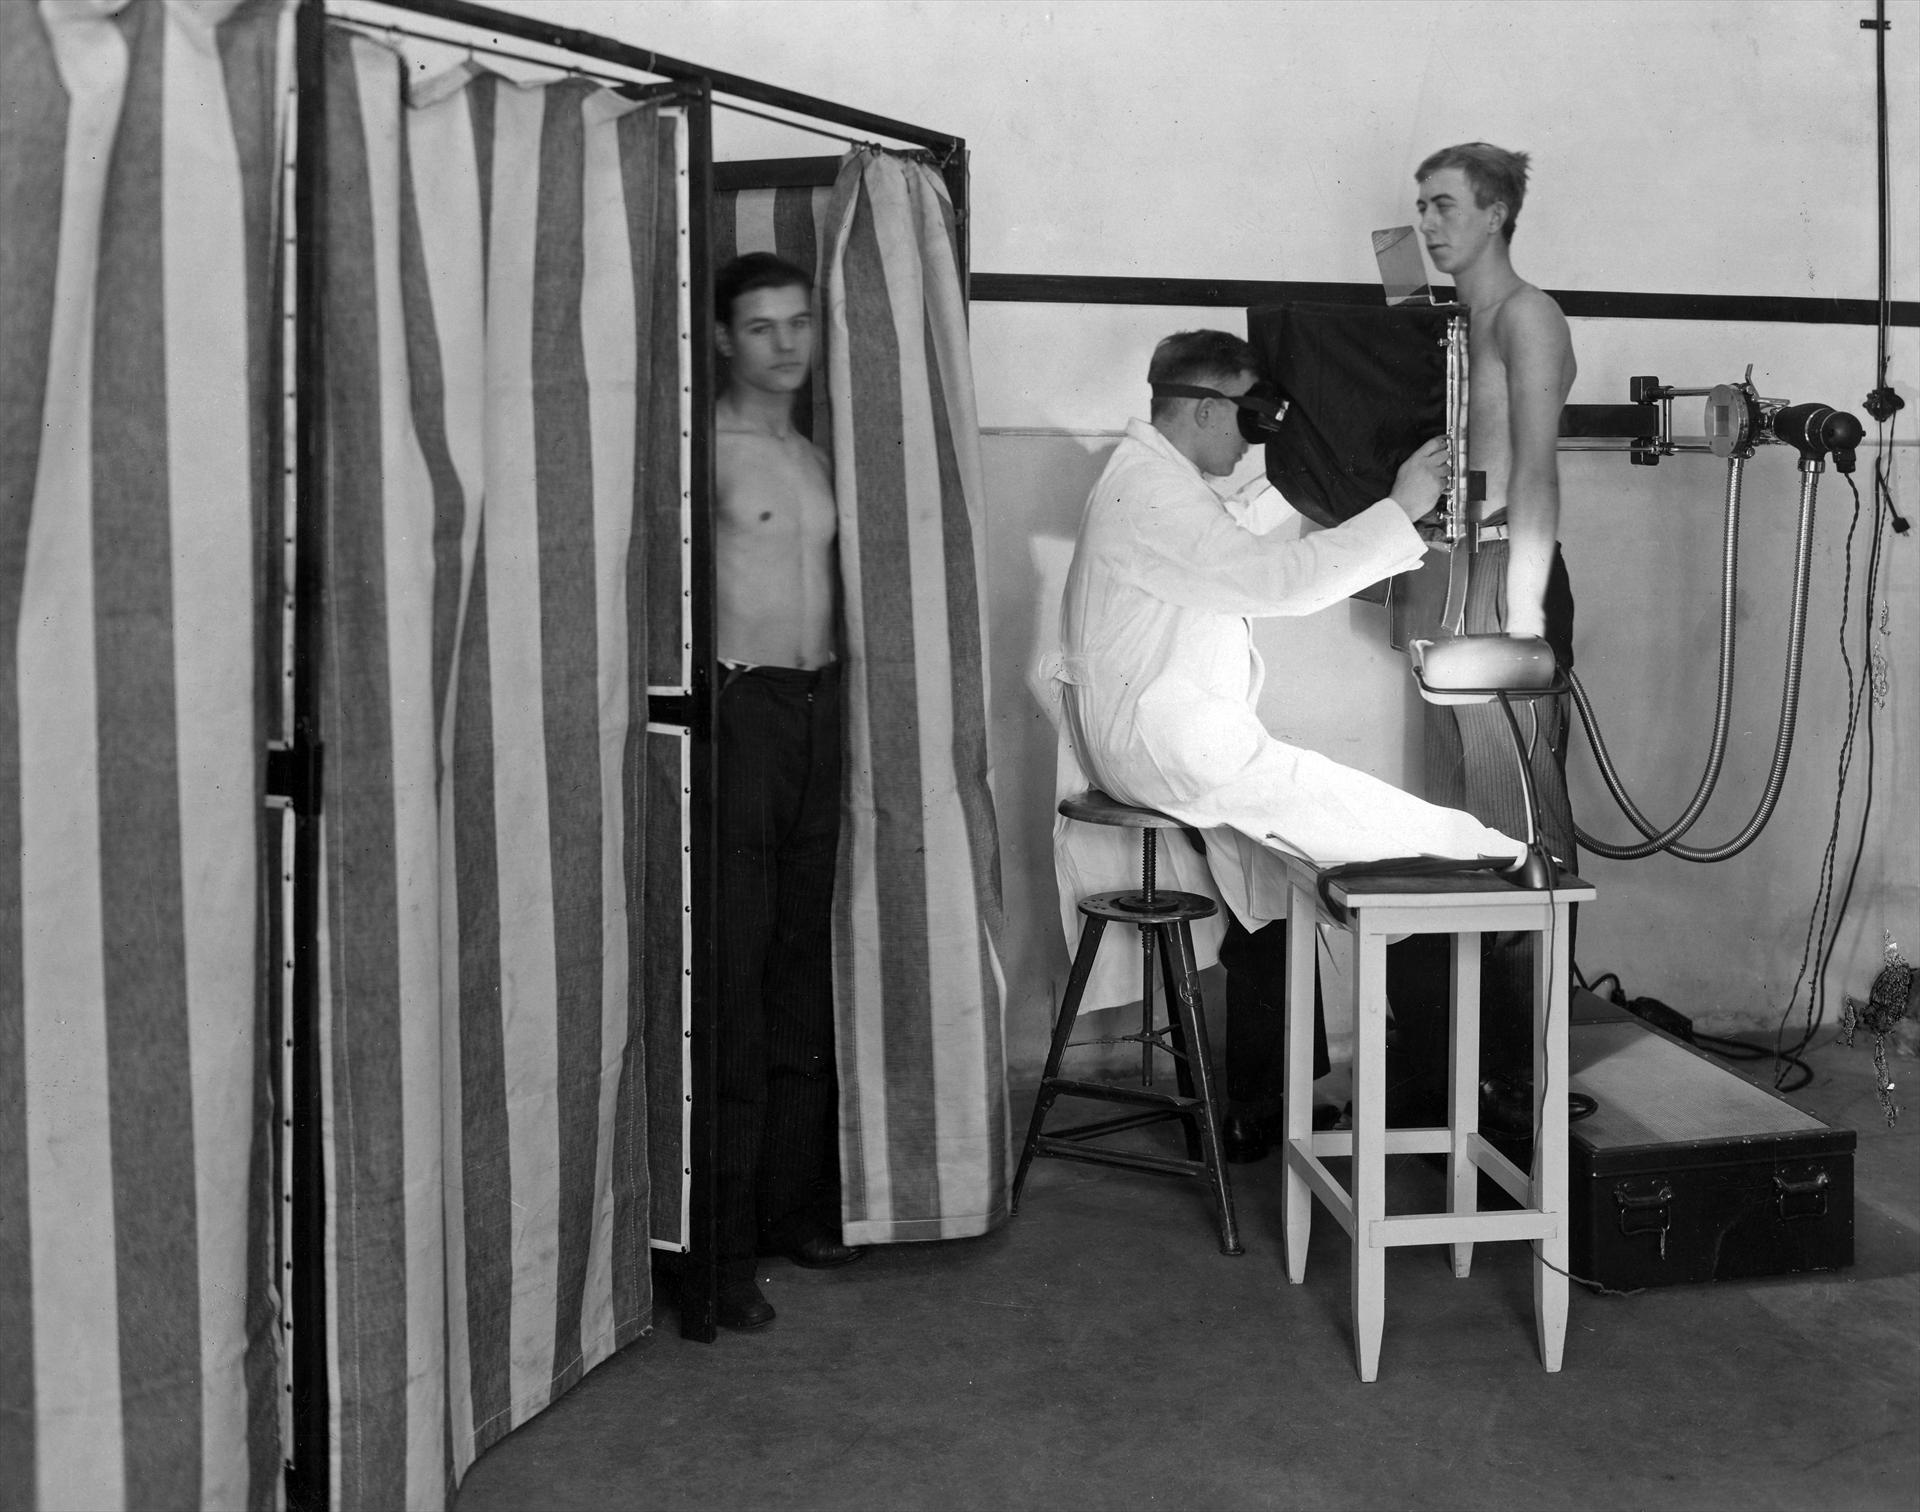 Early Philips diagnostic X-ray solution used in 1933 in the Netherlands